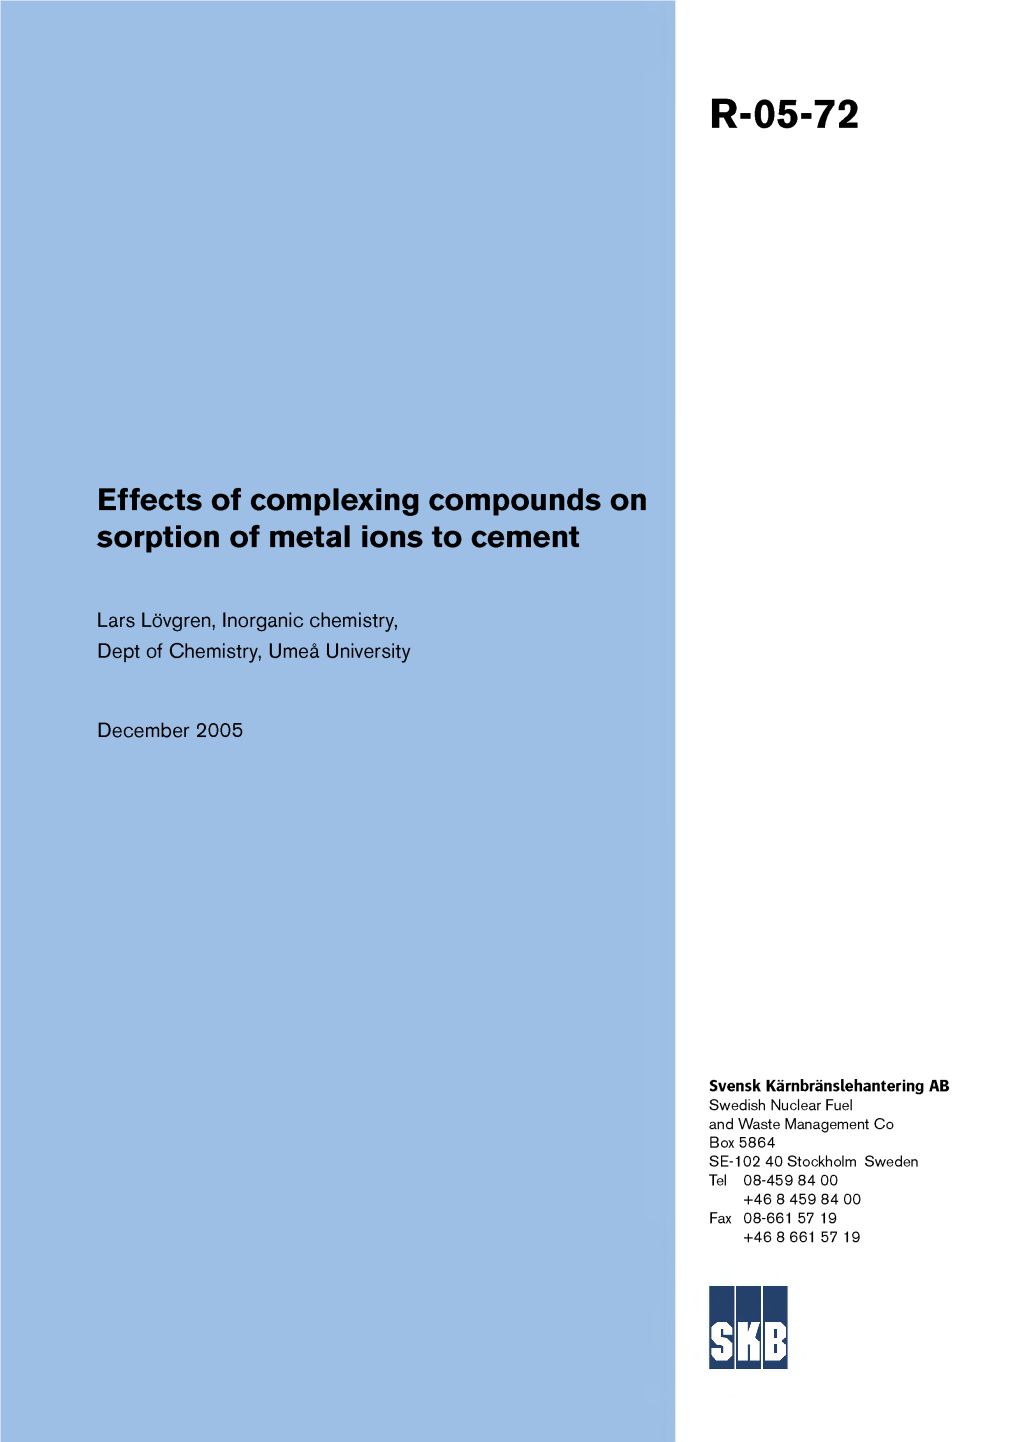 Effects of Complexing Compounds on Sorption of Metal Ions to Cement